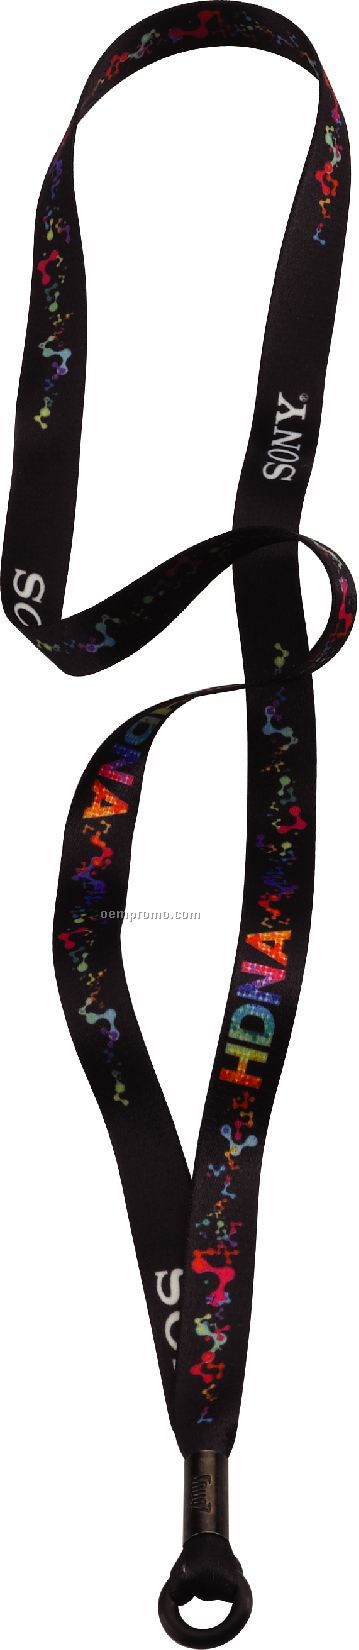 1/2" Rpet Dye Sublimated Lanyard With Metal Crimp & Rubber O-ring